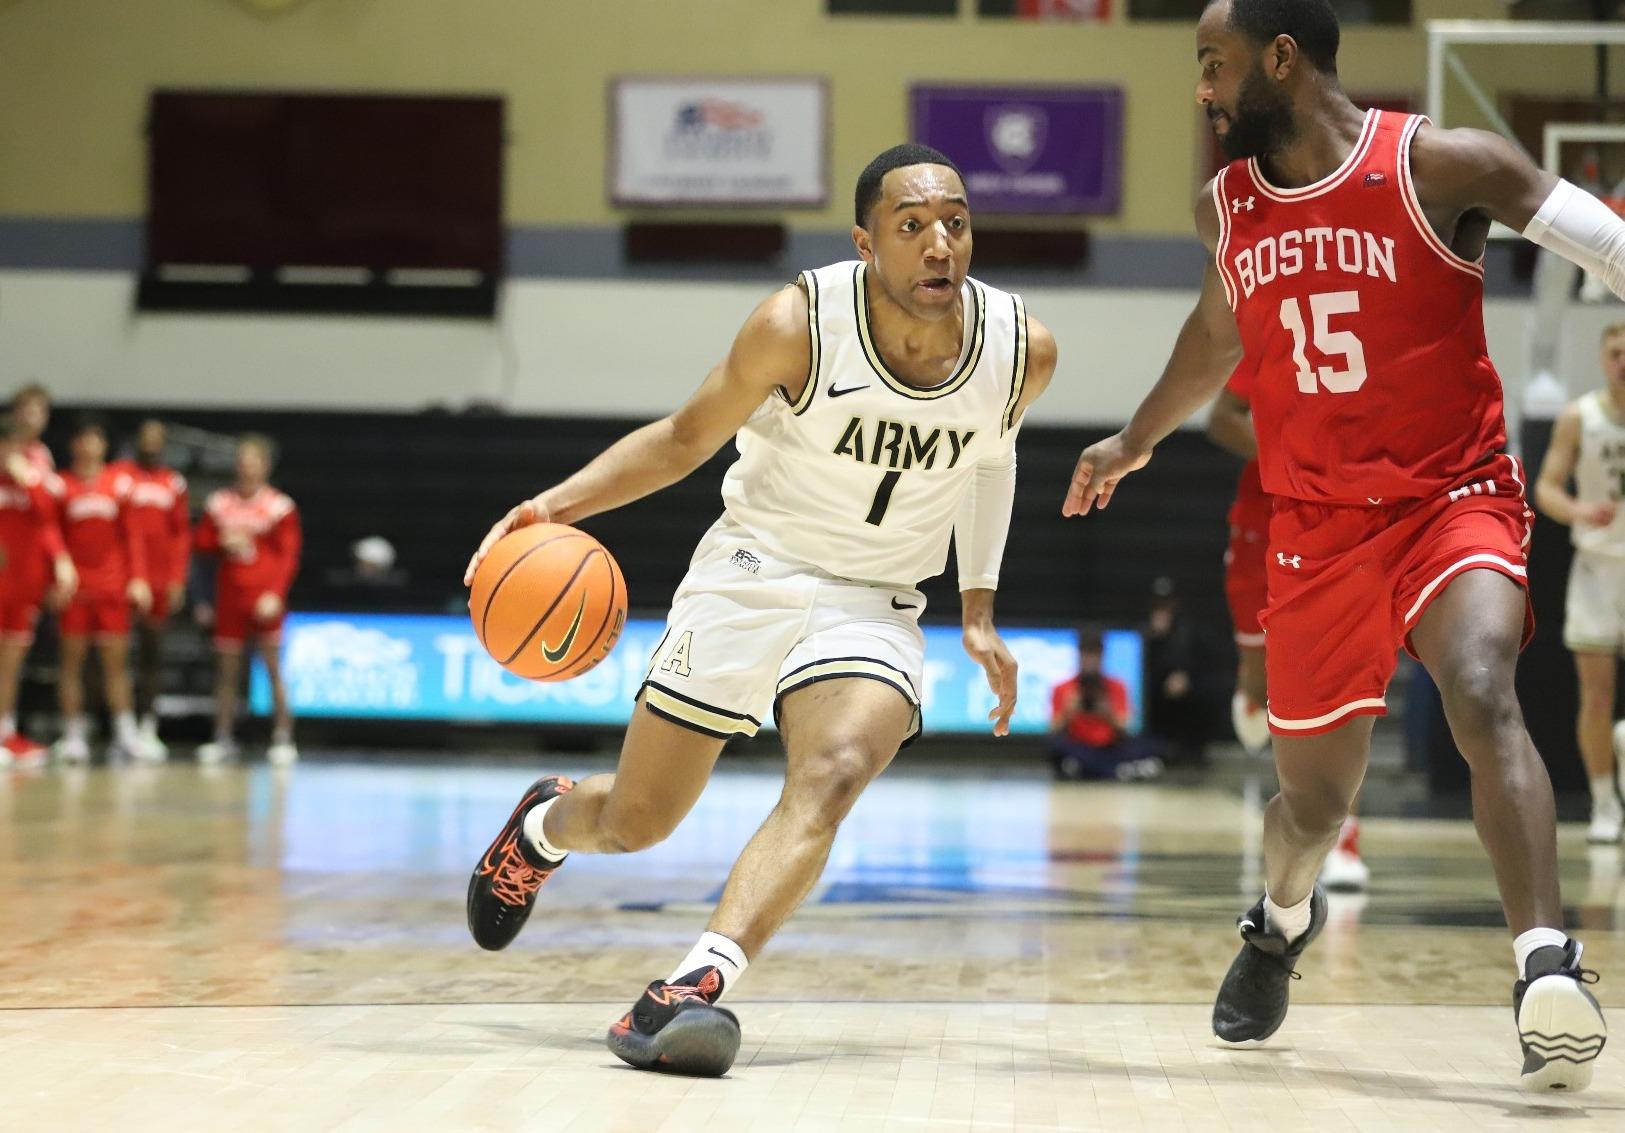 Army Basketball Tournament Update - As For Football